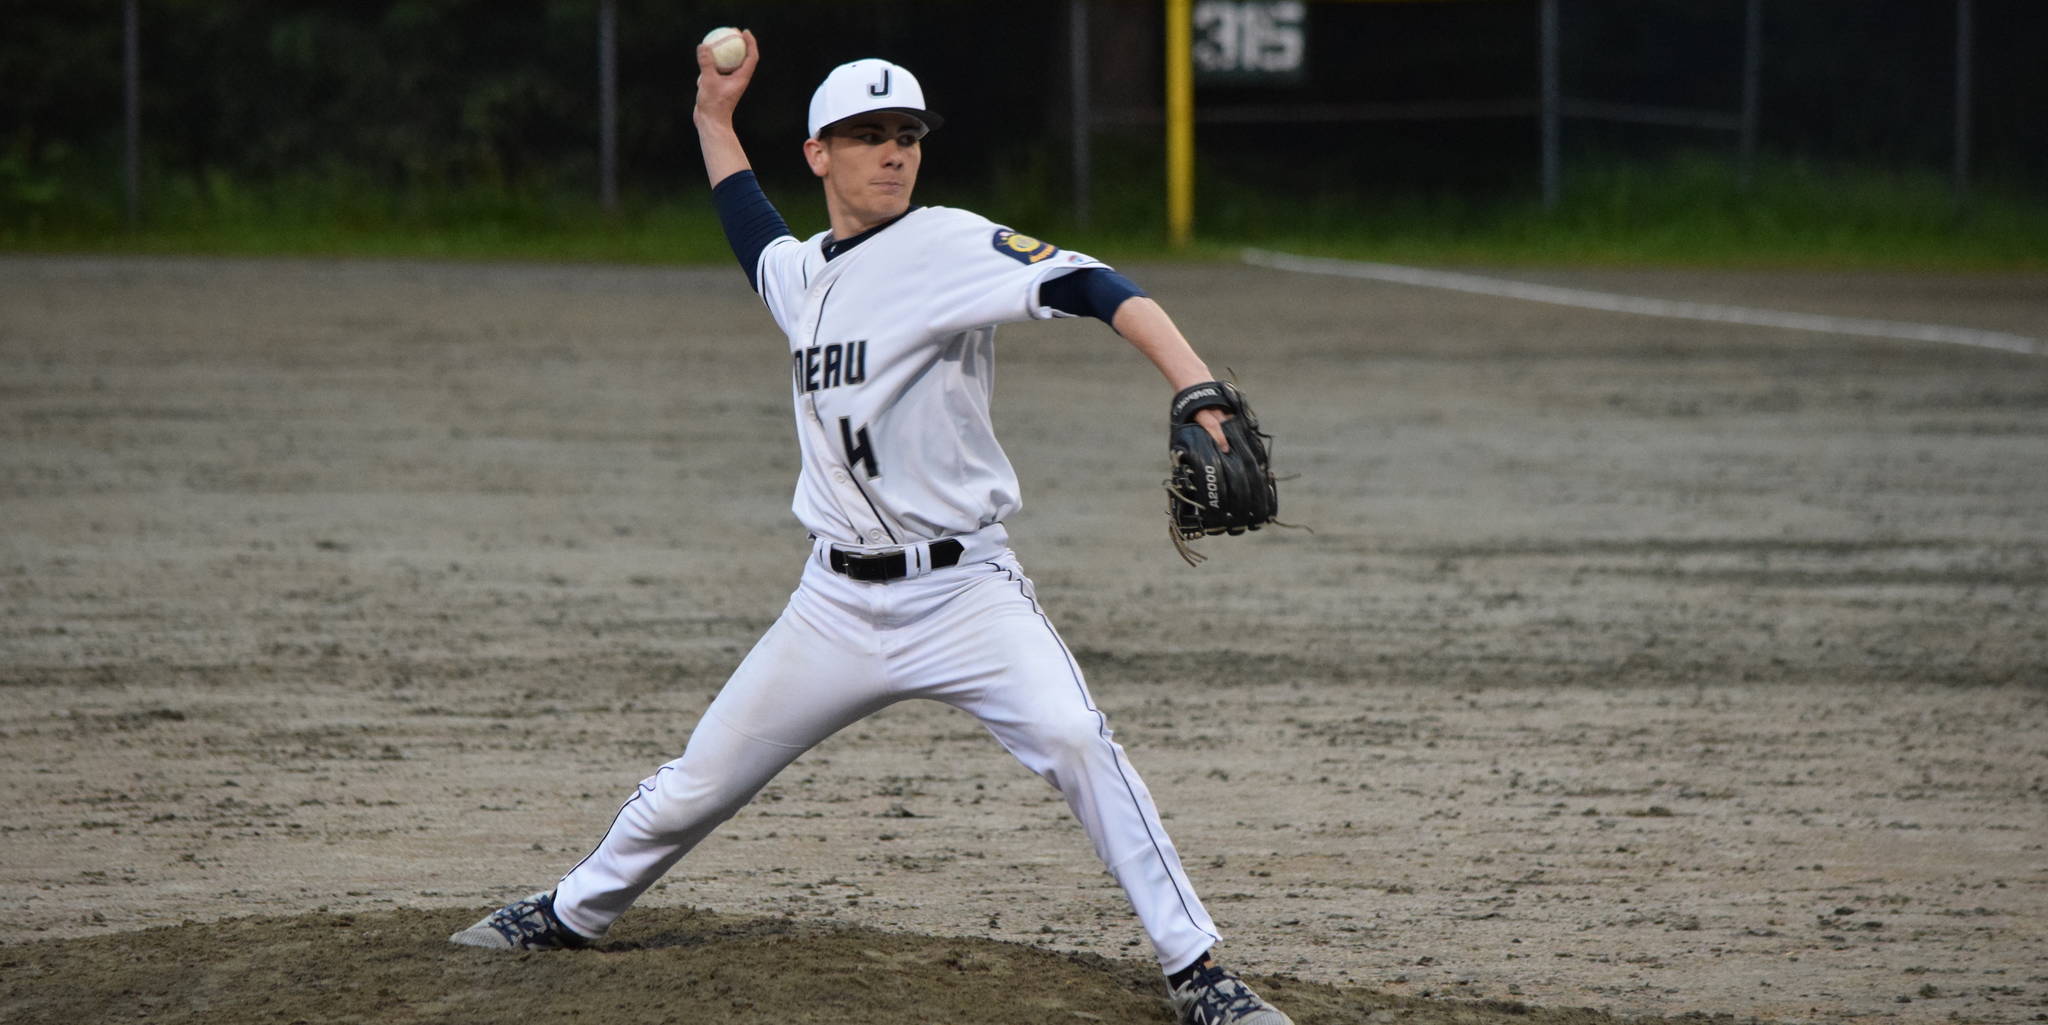 Juneau Post 25’s Chandler Lewis pitches against Wasilla Post 35 on Friday. Lewis faced nine batters in the sixth and seventh innings and didn’t give up a hit. (Nolin Ainsworth | Juneau Empire)